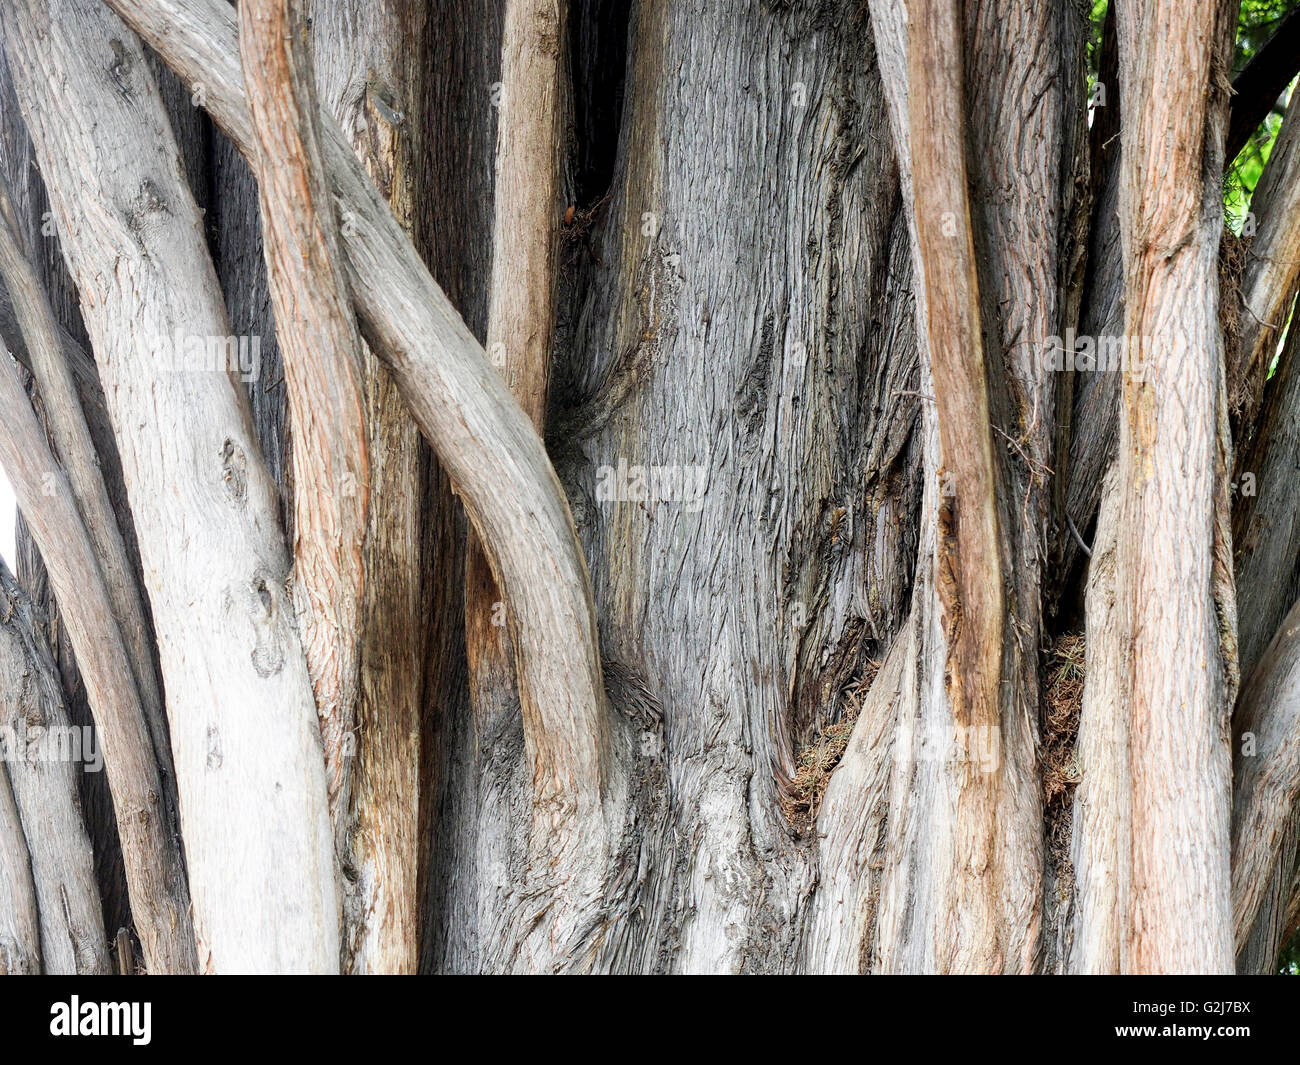 close up of a tree trunk Photographed in Madrid Botanical Gardens Stock Photo